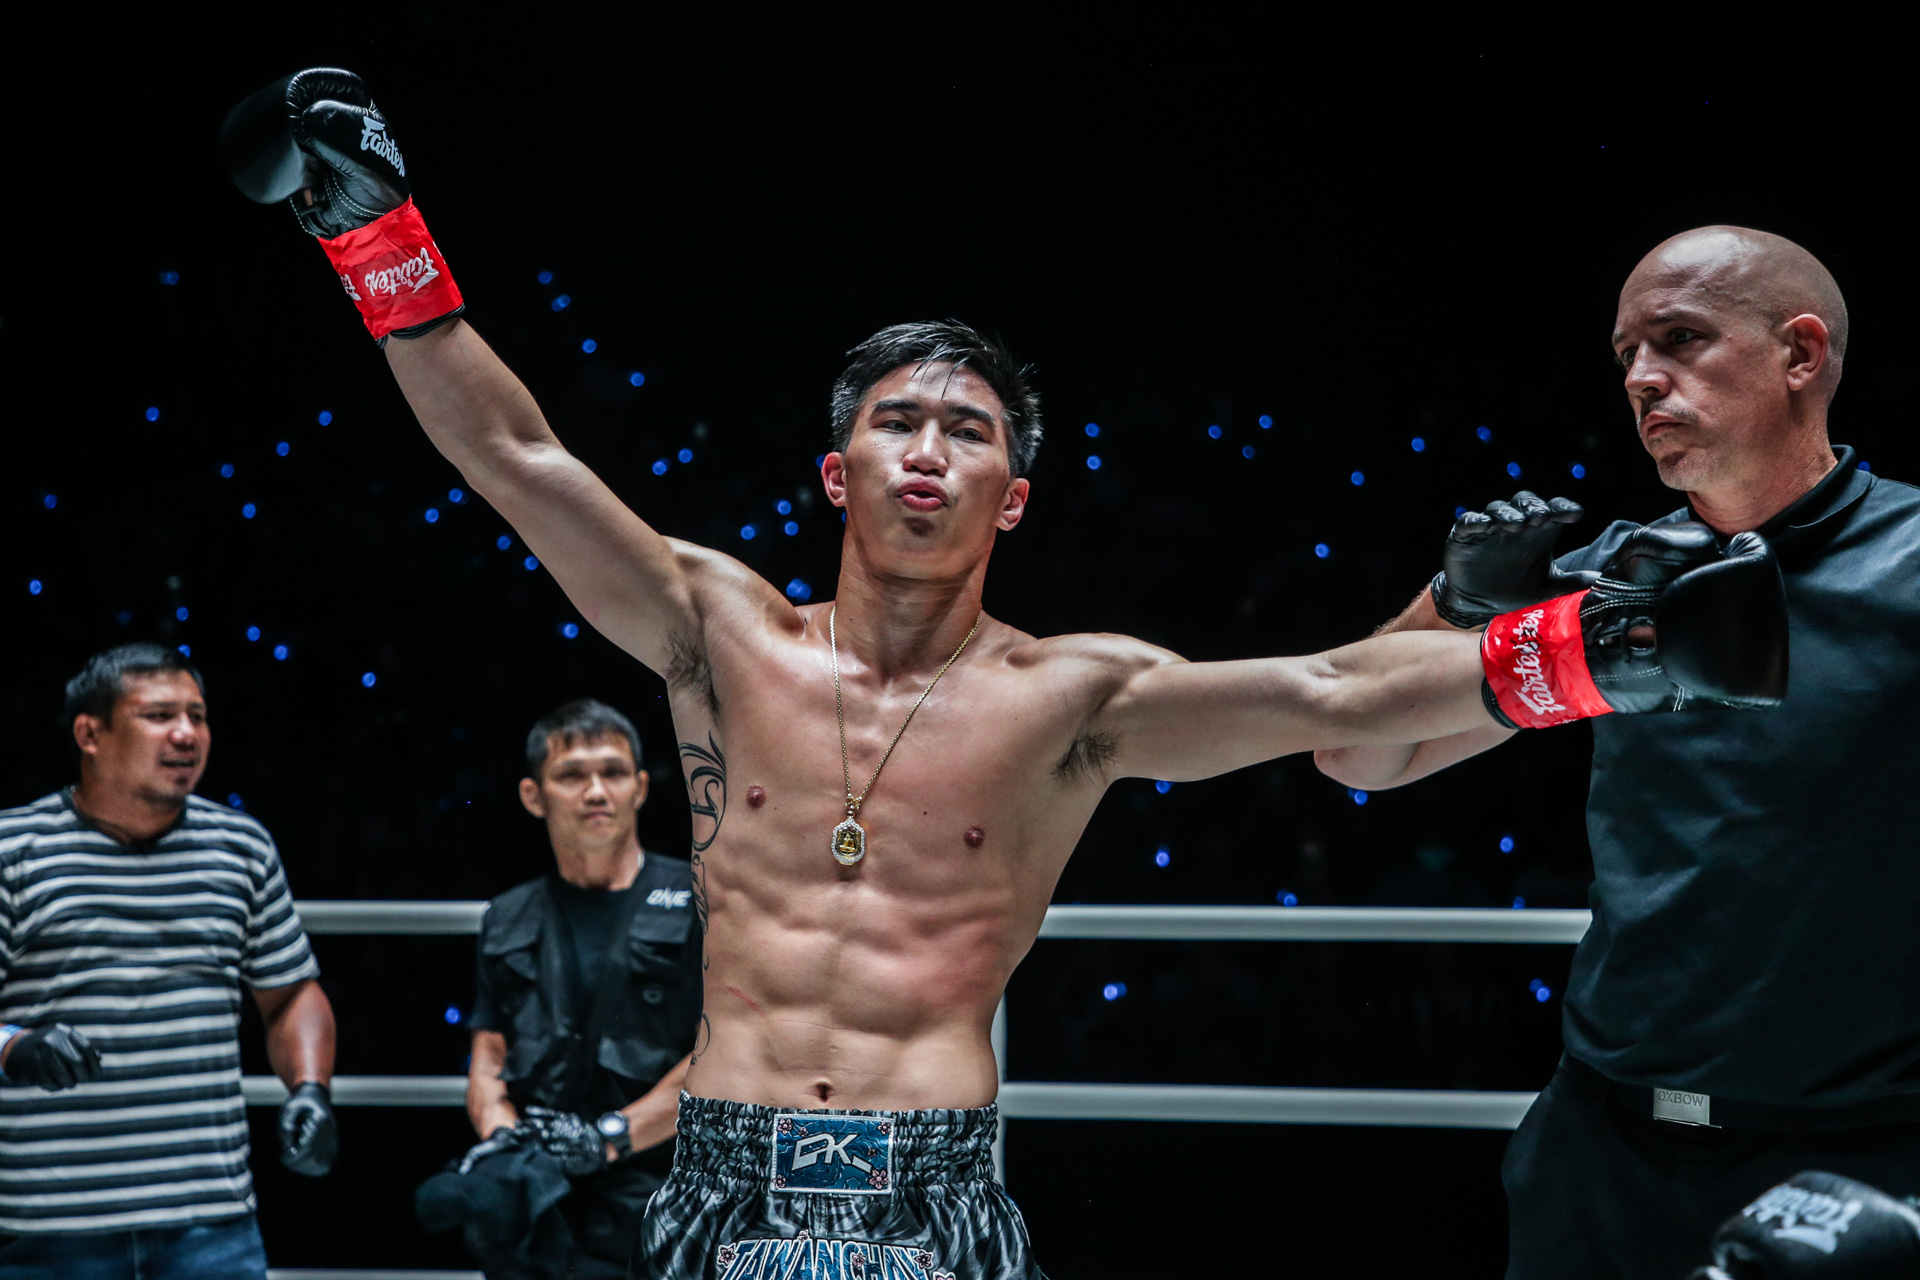 Tawanchai vs. Superbon Muay Thai title bout booked as ONE Fight